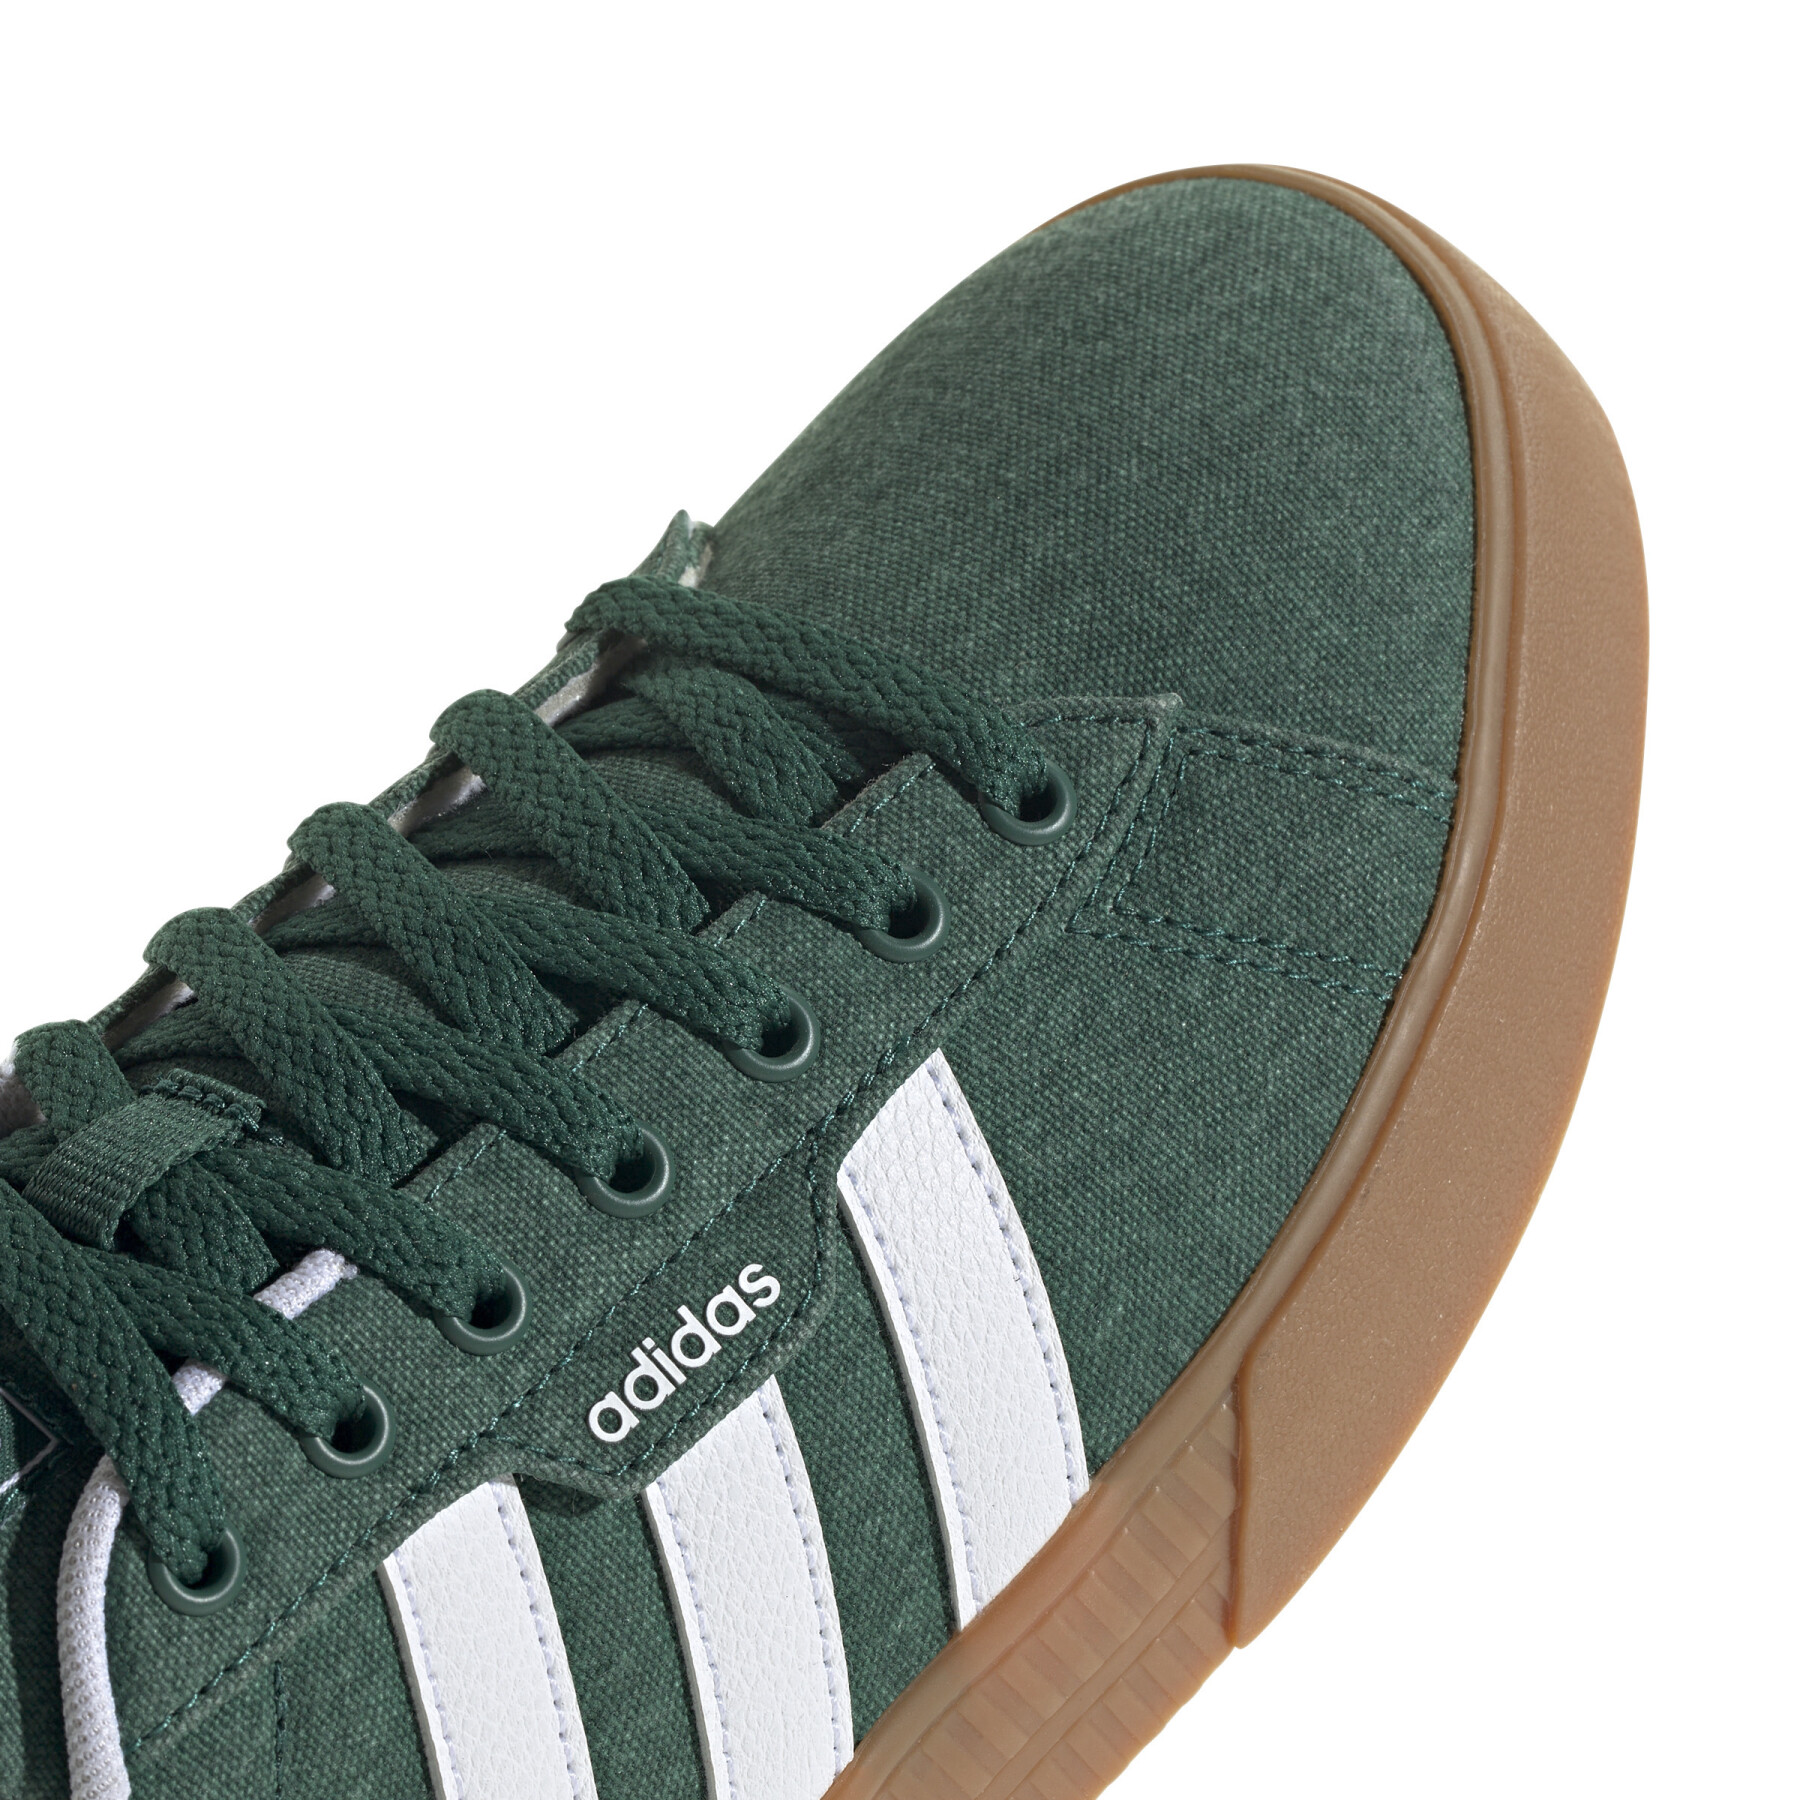 Suede sneakers adidas Daily 3.0